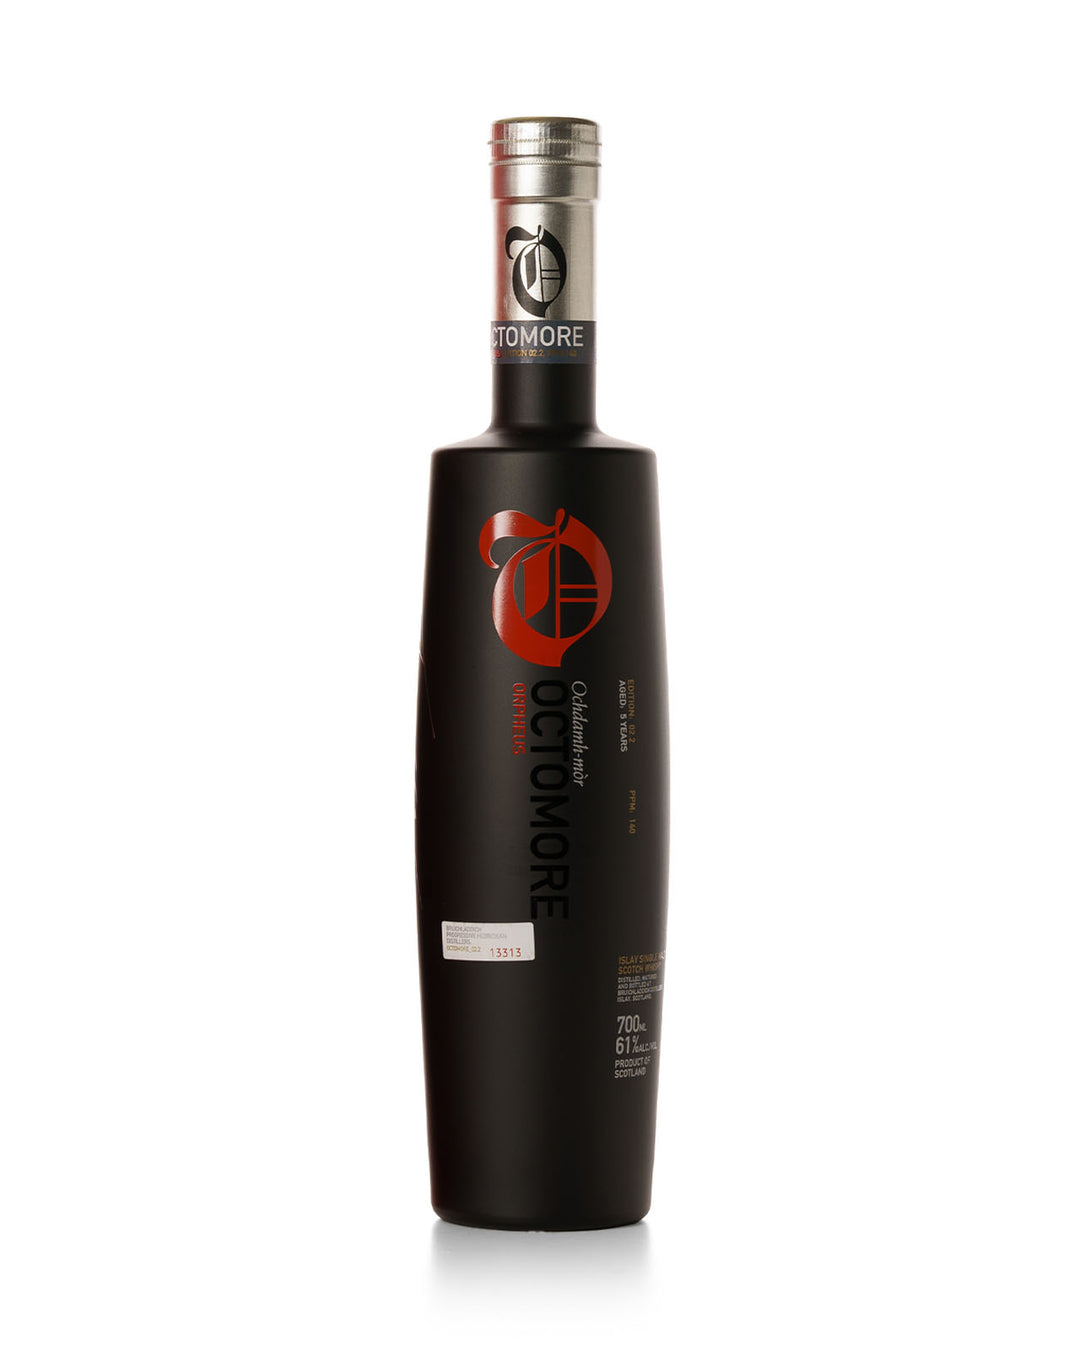 Octomore Orpheus Edition 02.2 5 Year Old With Original Tube